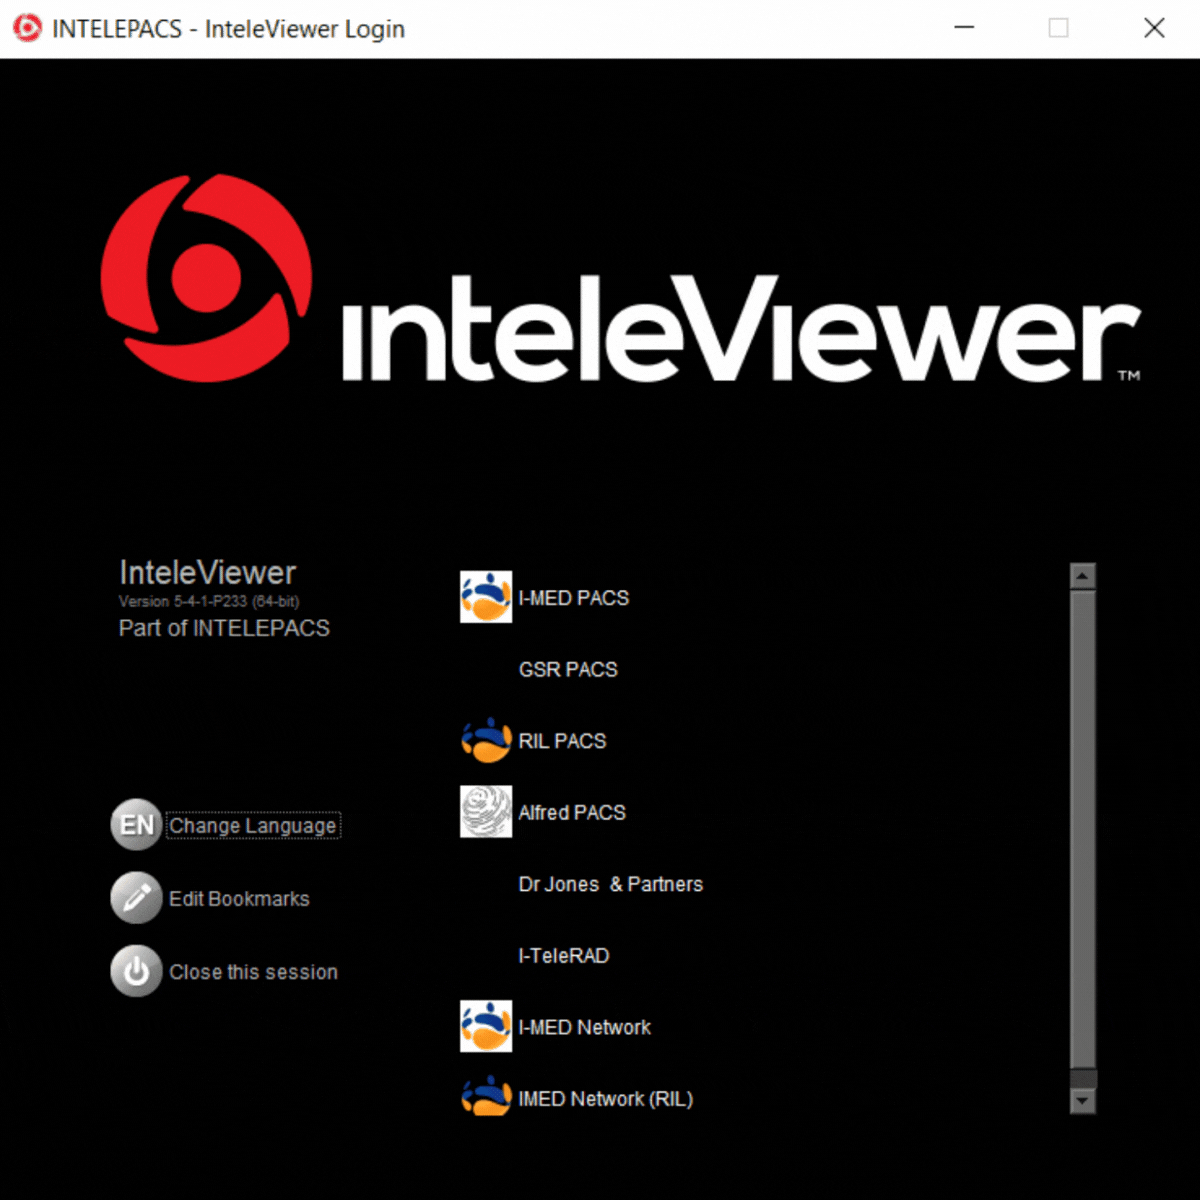 Animation to check what version of InteleViewer you are running.